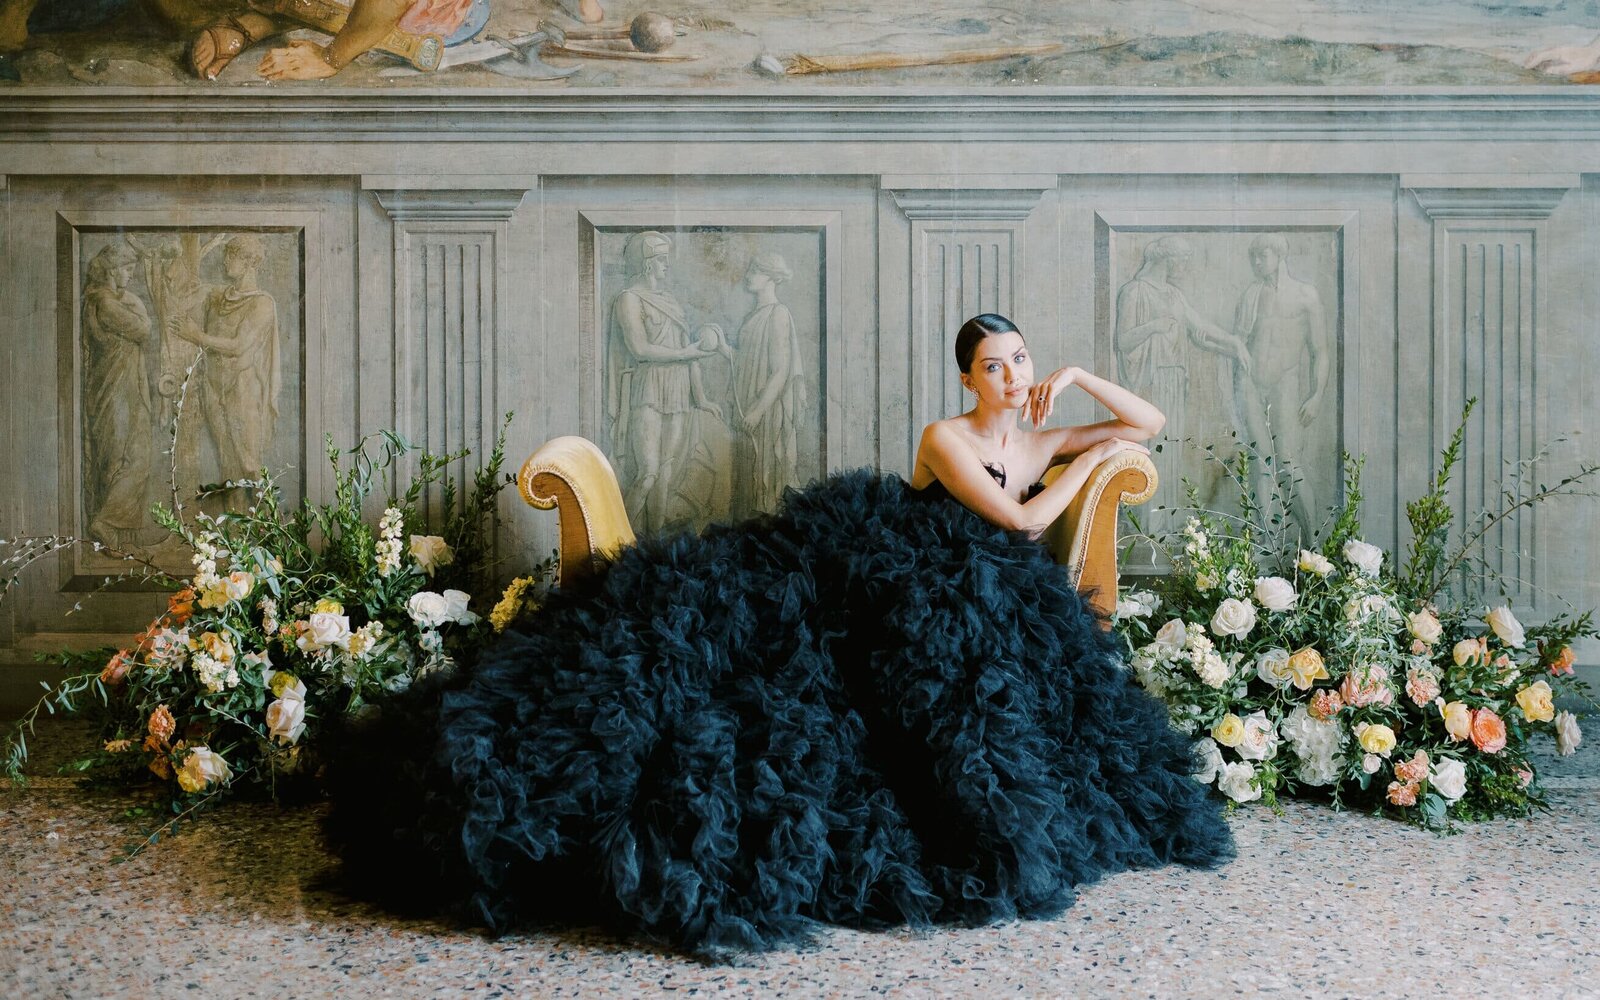 a-woman-in-a-blackgown-sits-on-a-chair-in-front-of-flowers-2